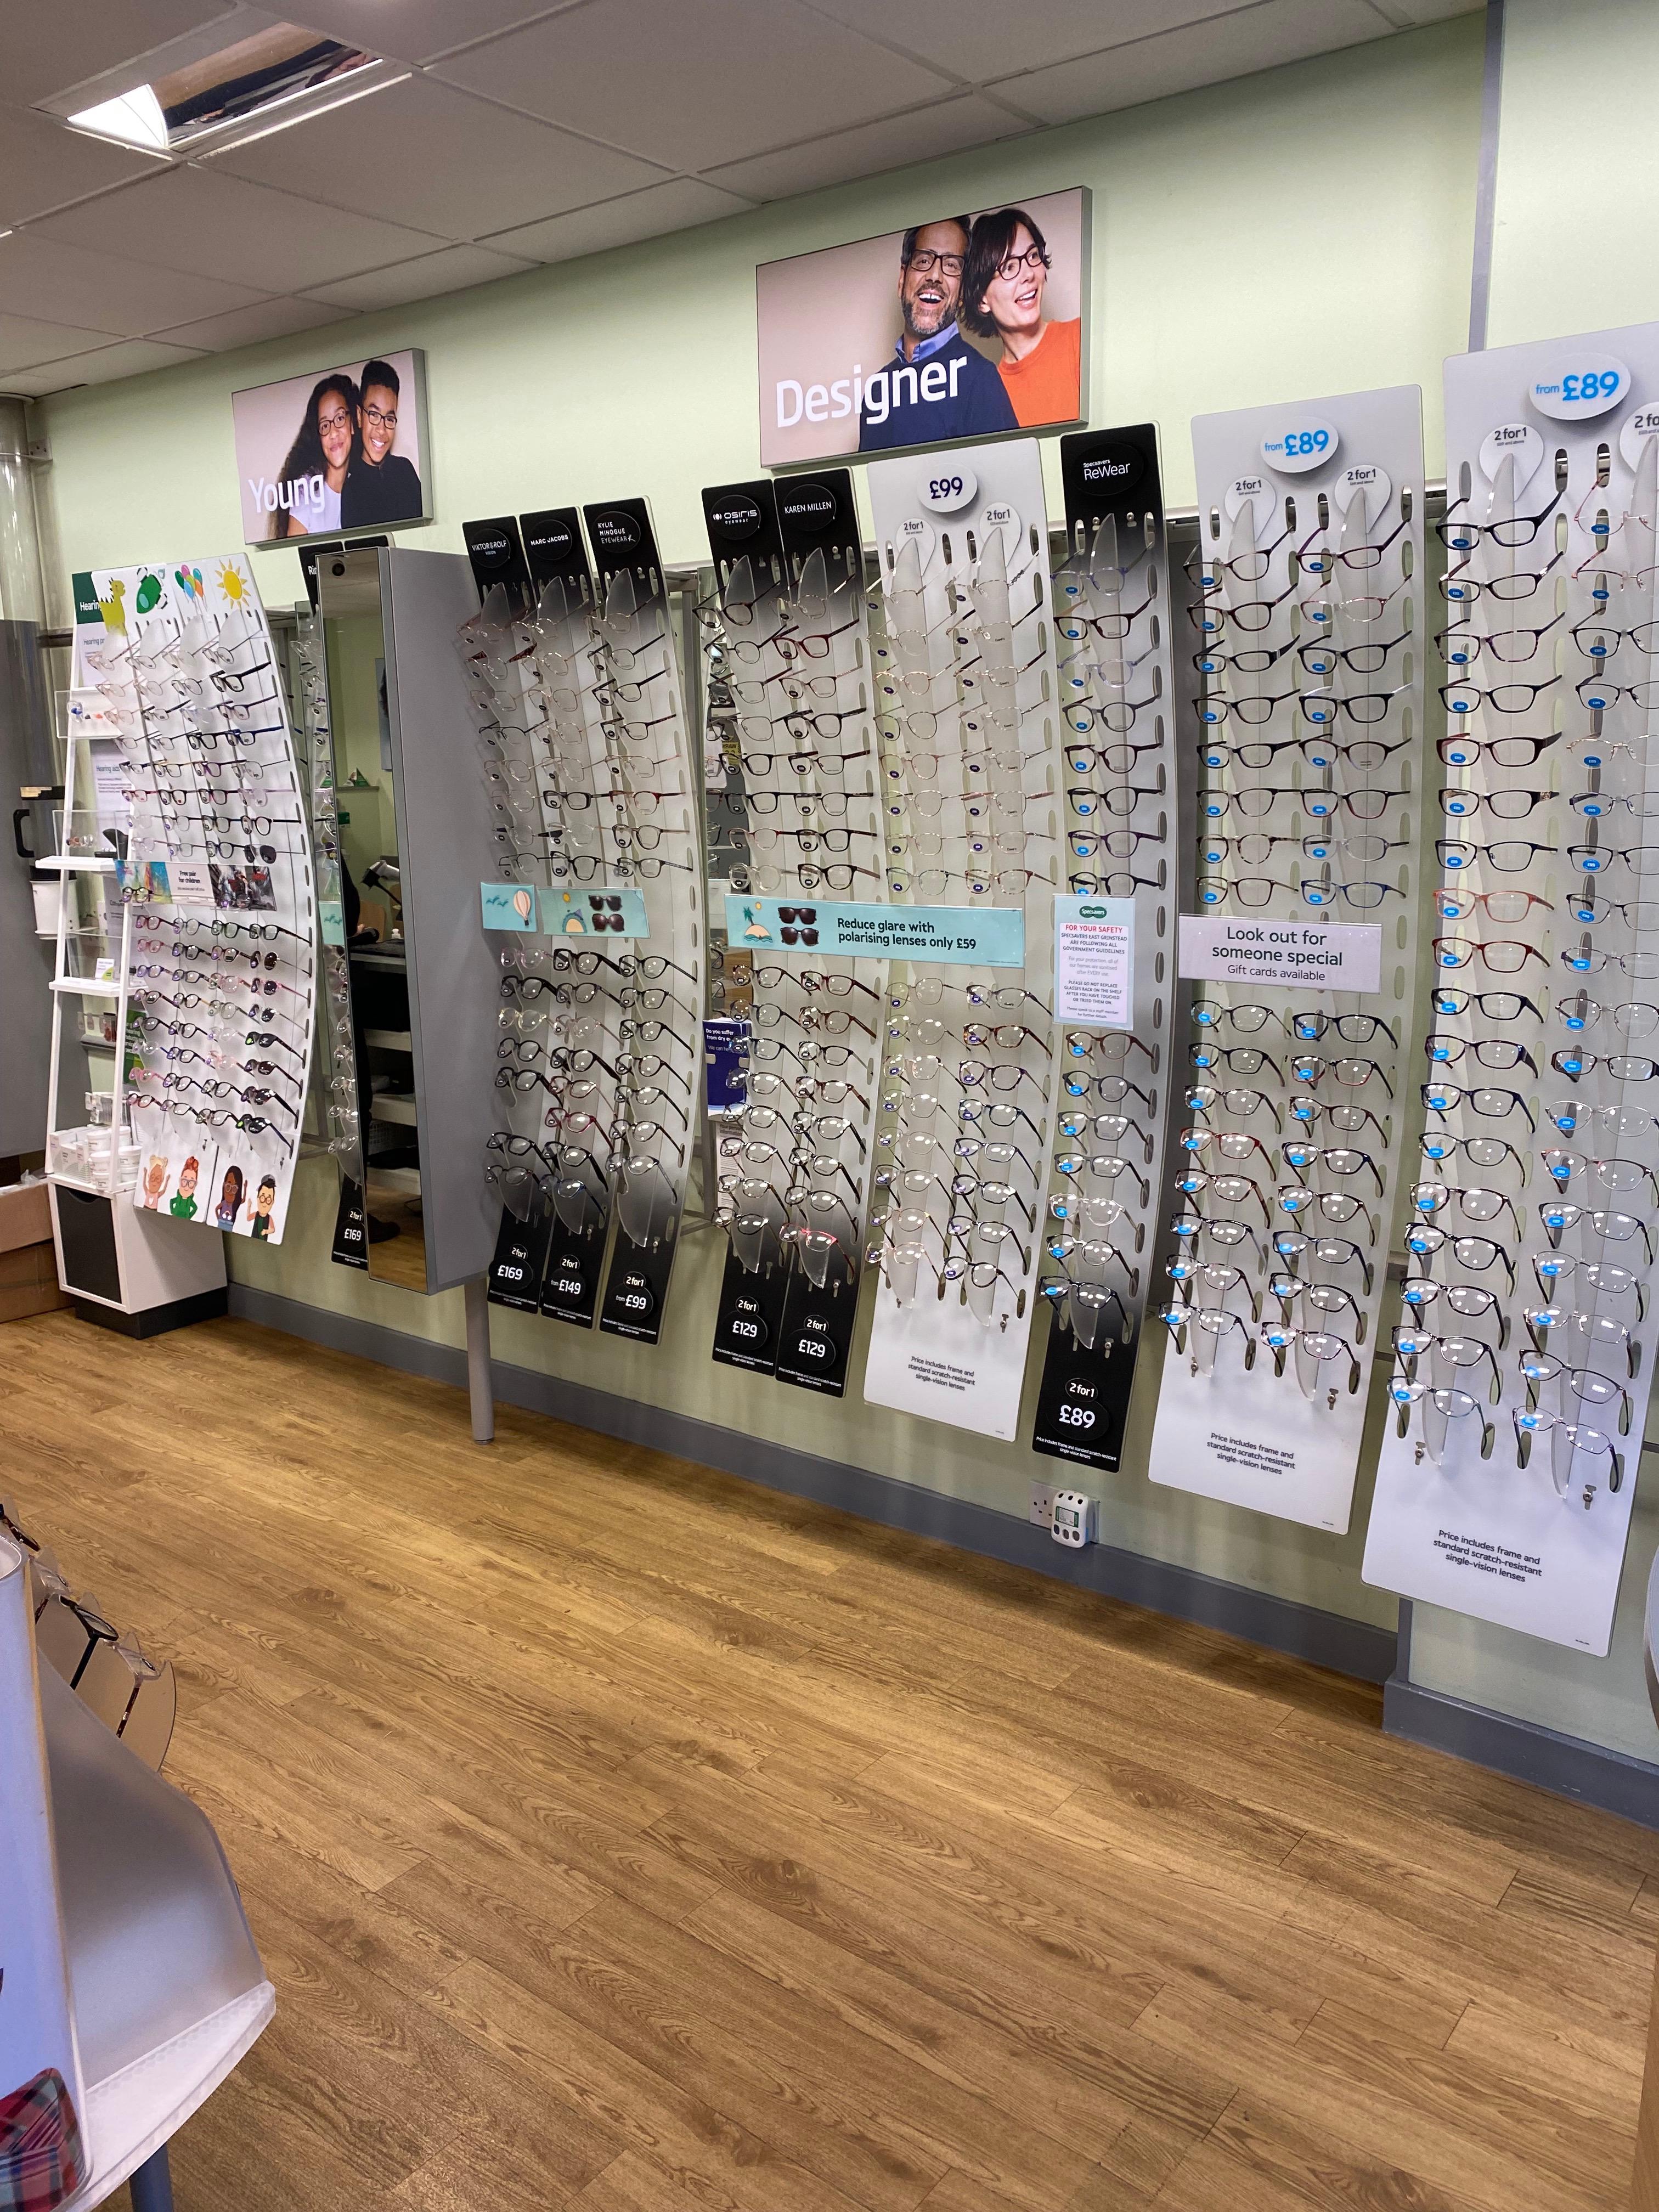 Specsavers East Grinstead Specsavers Opticians and Audiologists - East Grinstead East Grinstead 01342 335360